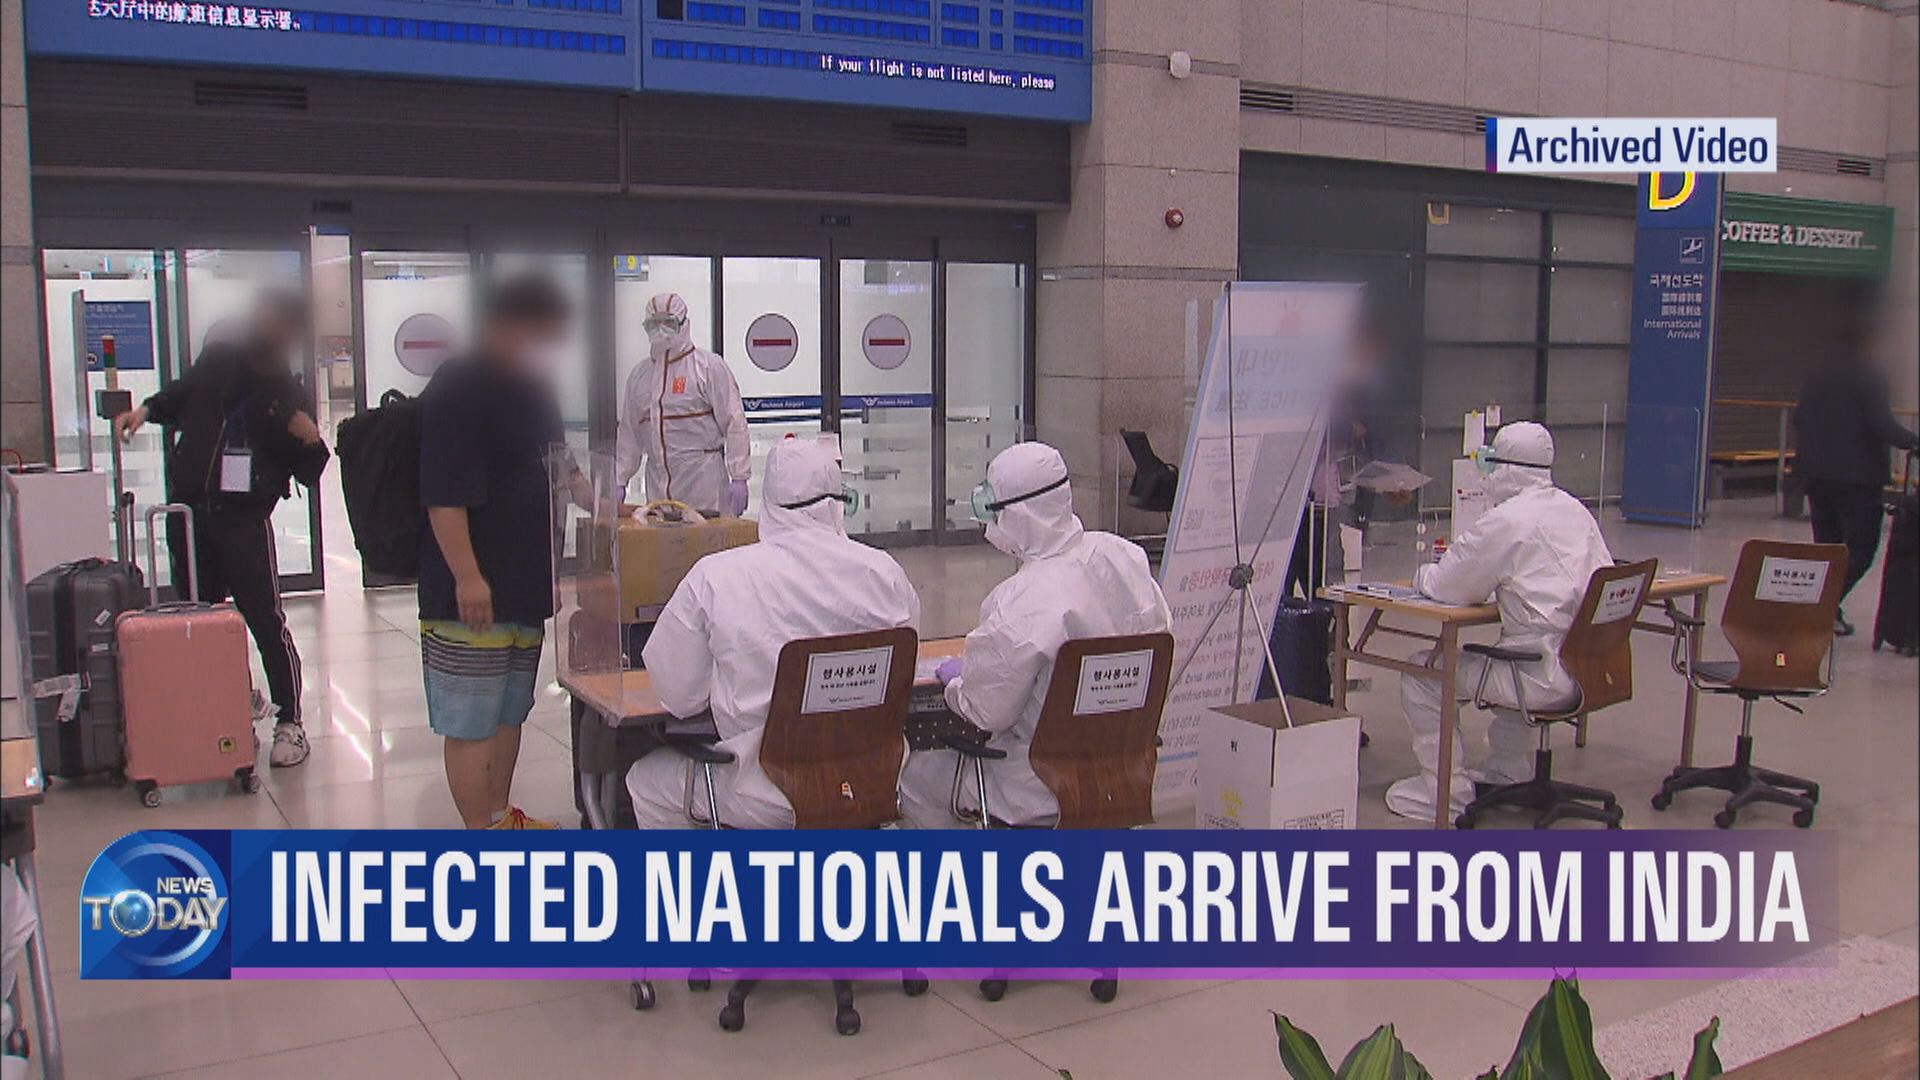 INFECTED NATIONALS ARRIVE FROM INDIA